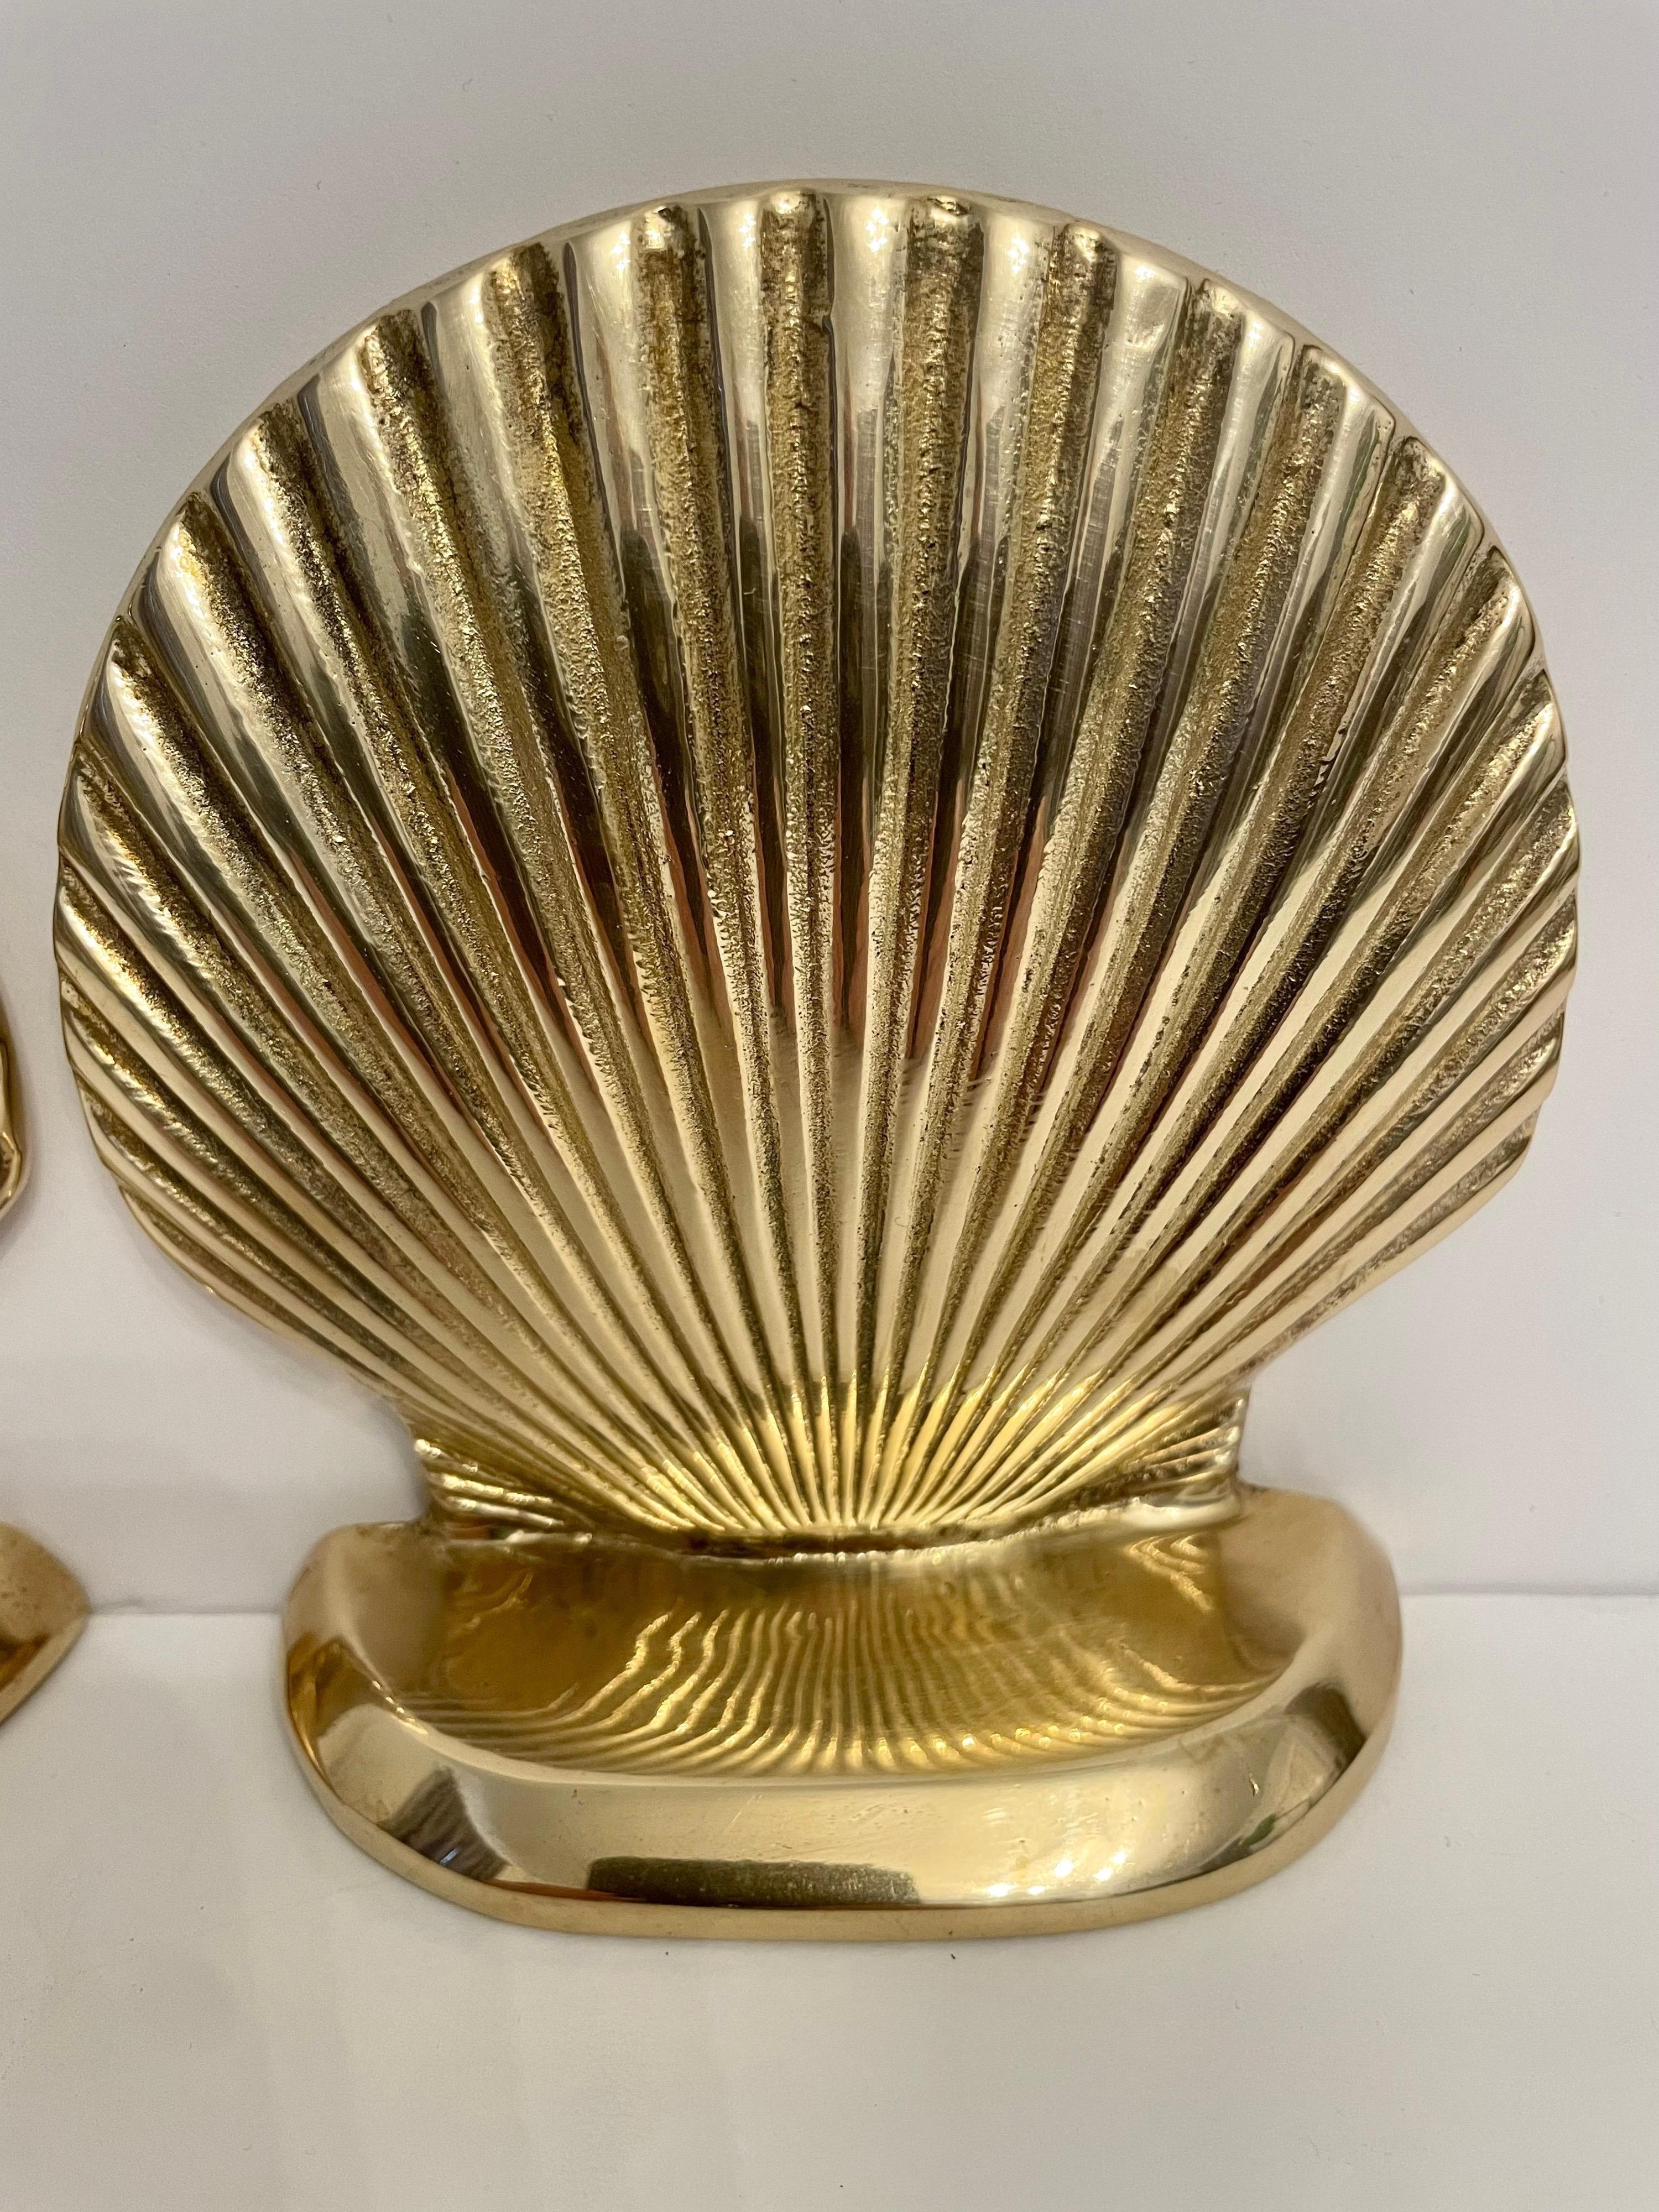 Vintage brass clam shell seashell bookends. Good condition. Has nice weight to hold a stack of books. Great for your beach house! Any dark areas are reflection only.